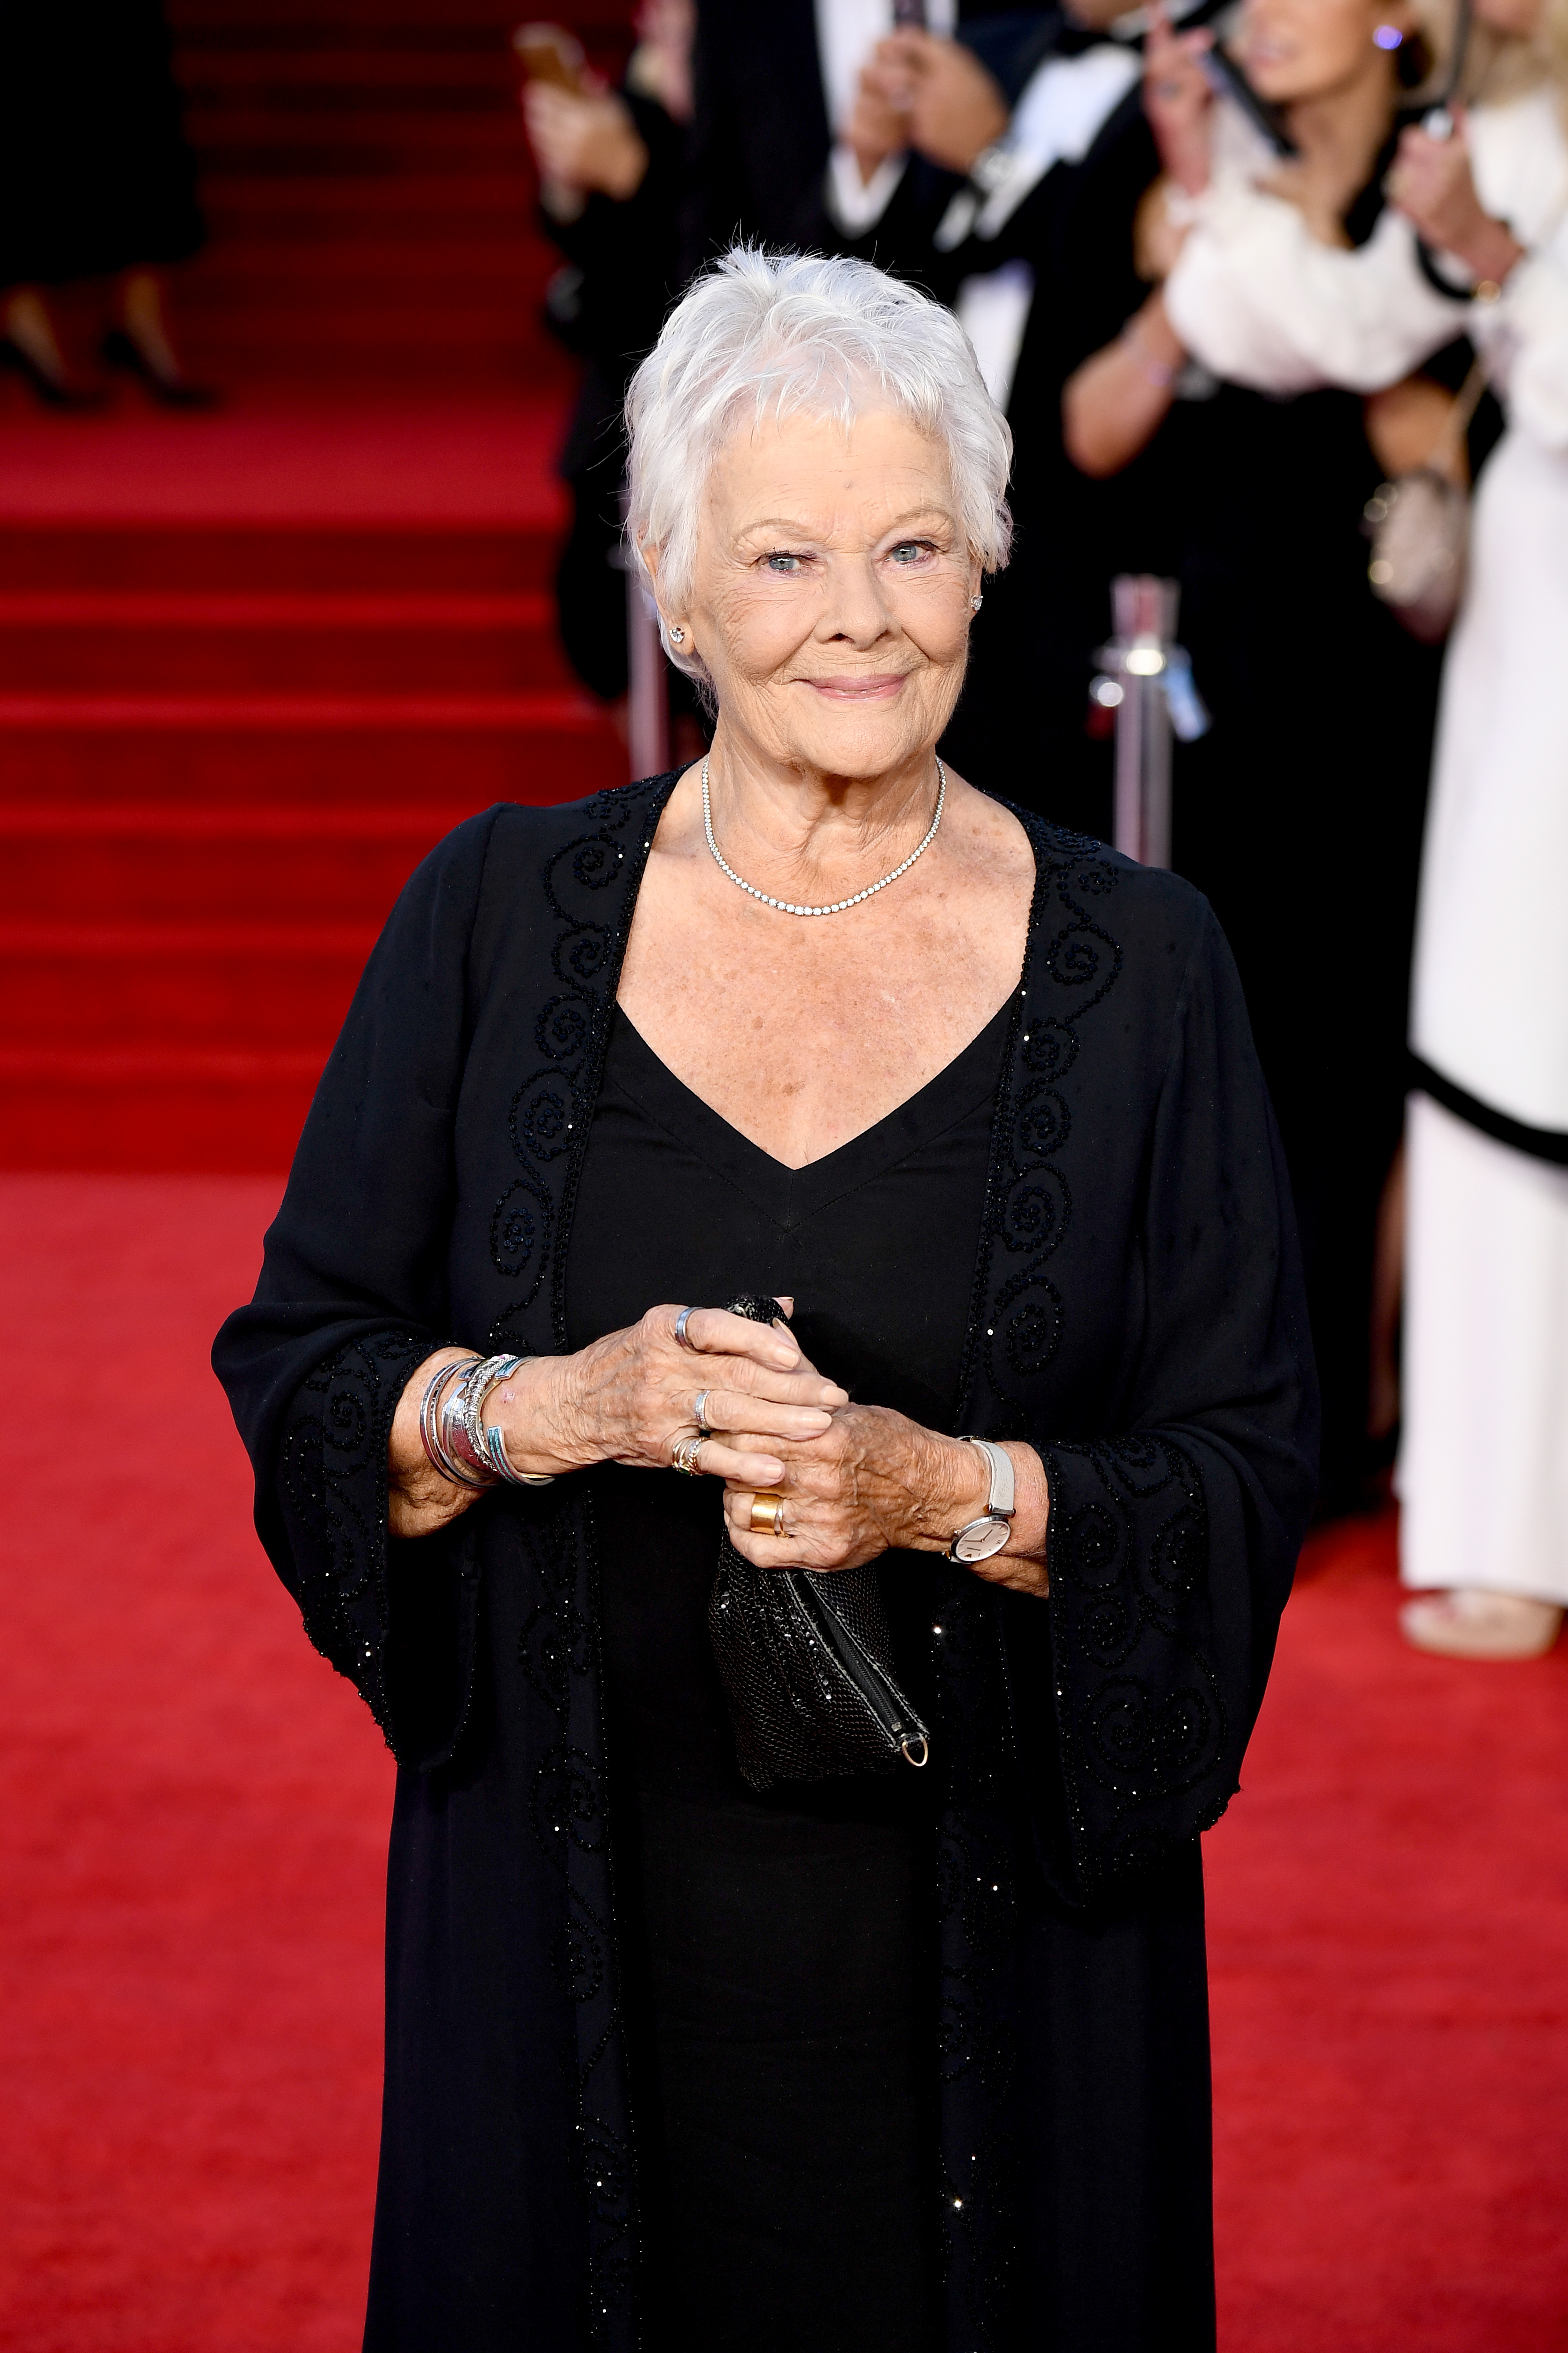 Dame Judi Dench arrives at the "No Time To Die" World Premiere at Royal Albert Hall in London, England, on September 28, 2021. | Source: Getty Images